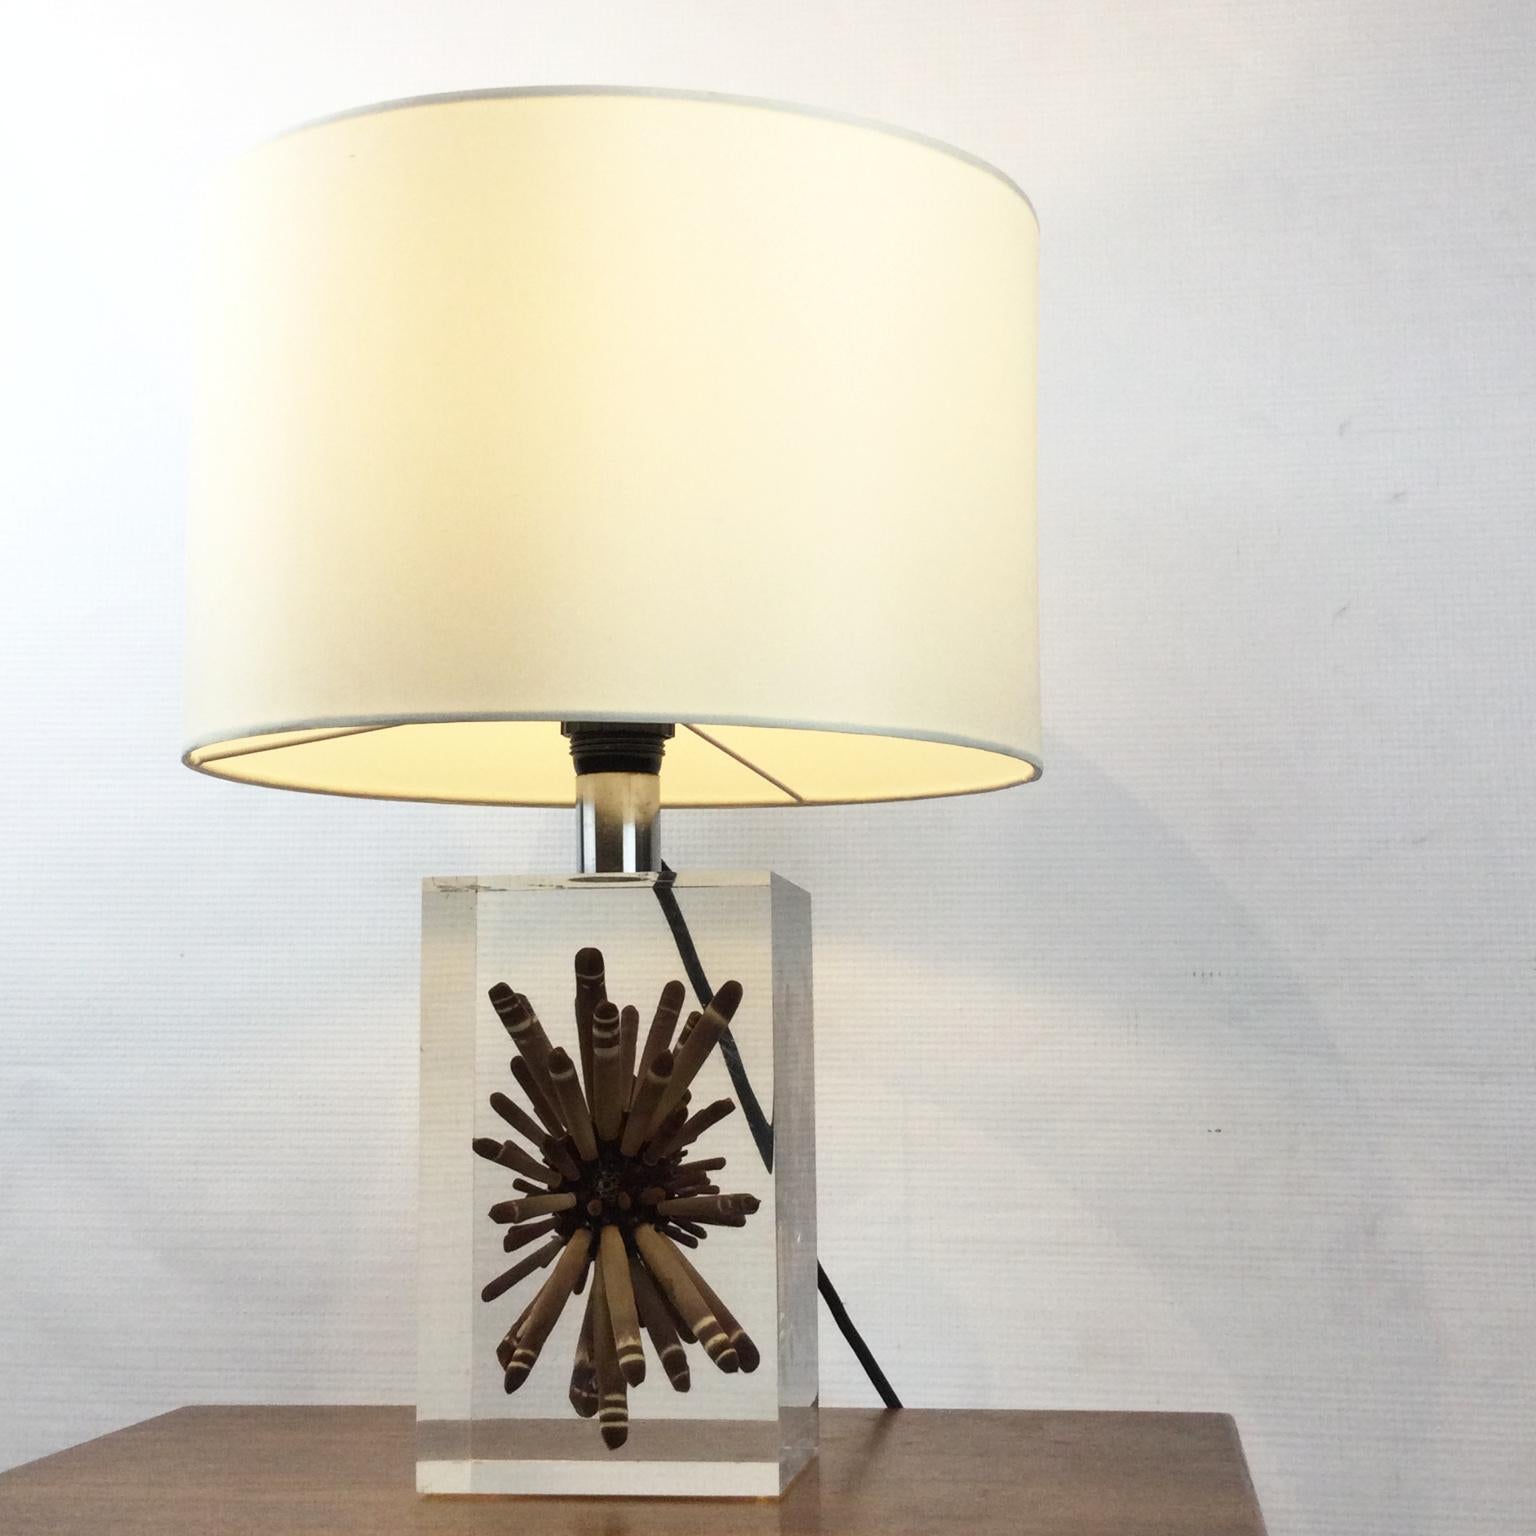 Pierre Giraudon 1970s Large Resin Table Lamp with Tropical Ursin Inclusion For Sale 3